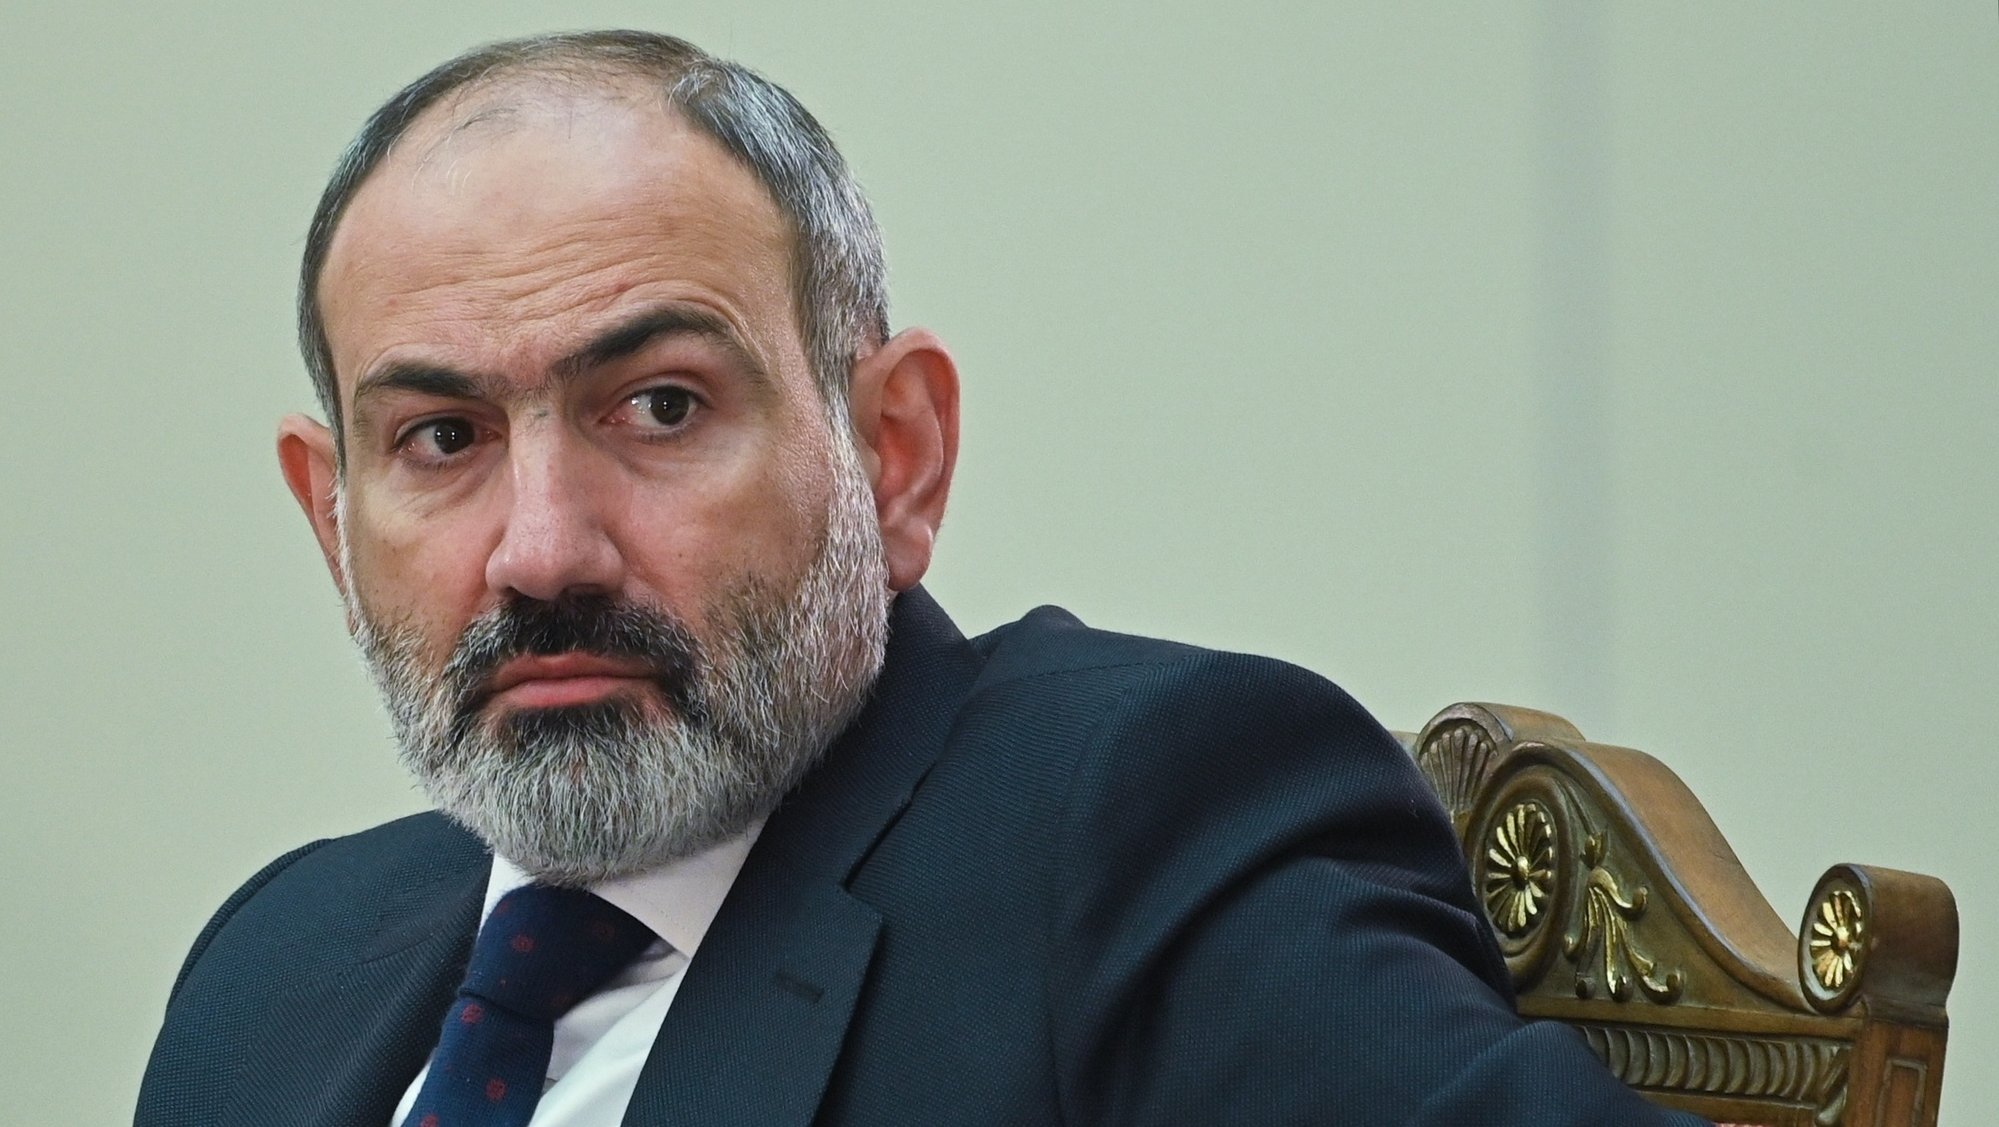 epa09658966 Armenian Prime Minister Nikol Pashinyan attends an informal annual summit of the Commonwealth of Independent States (CIS) heads of state at the Konstantin Palace presidential residence in Strelna, outside St. Petersburg, Russia,  28 December 2021.  EPA/EVGENY BIYATOV/SPUTNIK/KREMLIN POOL